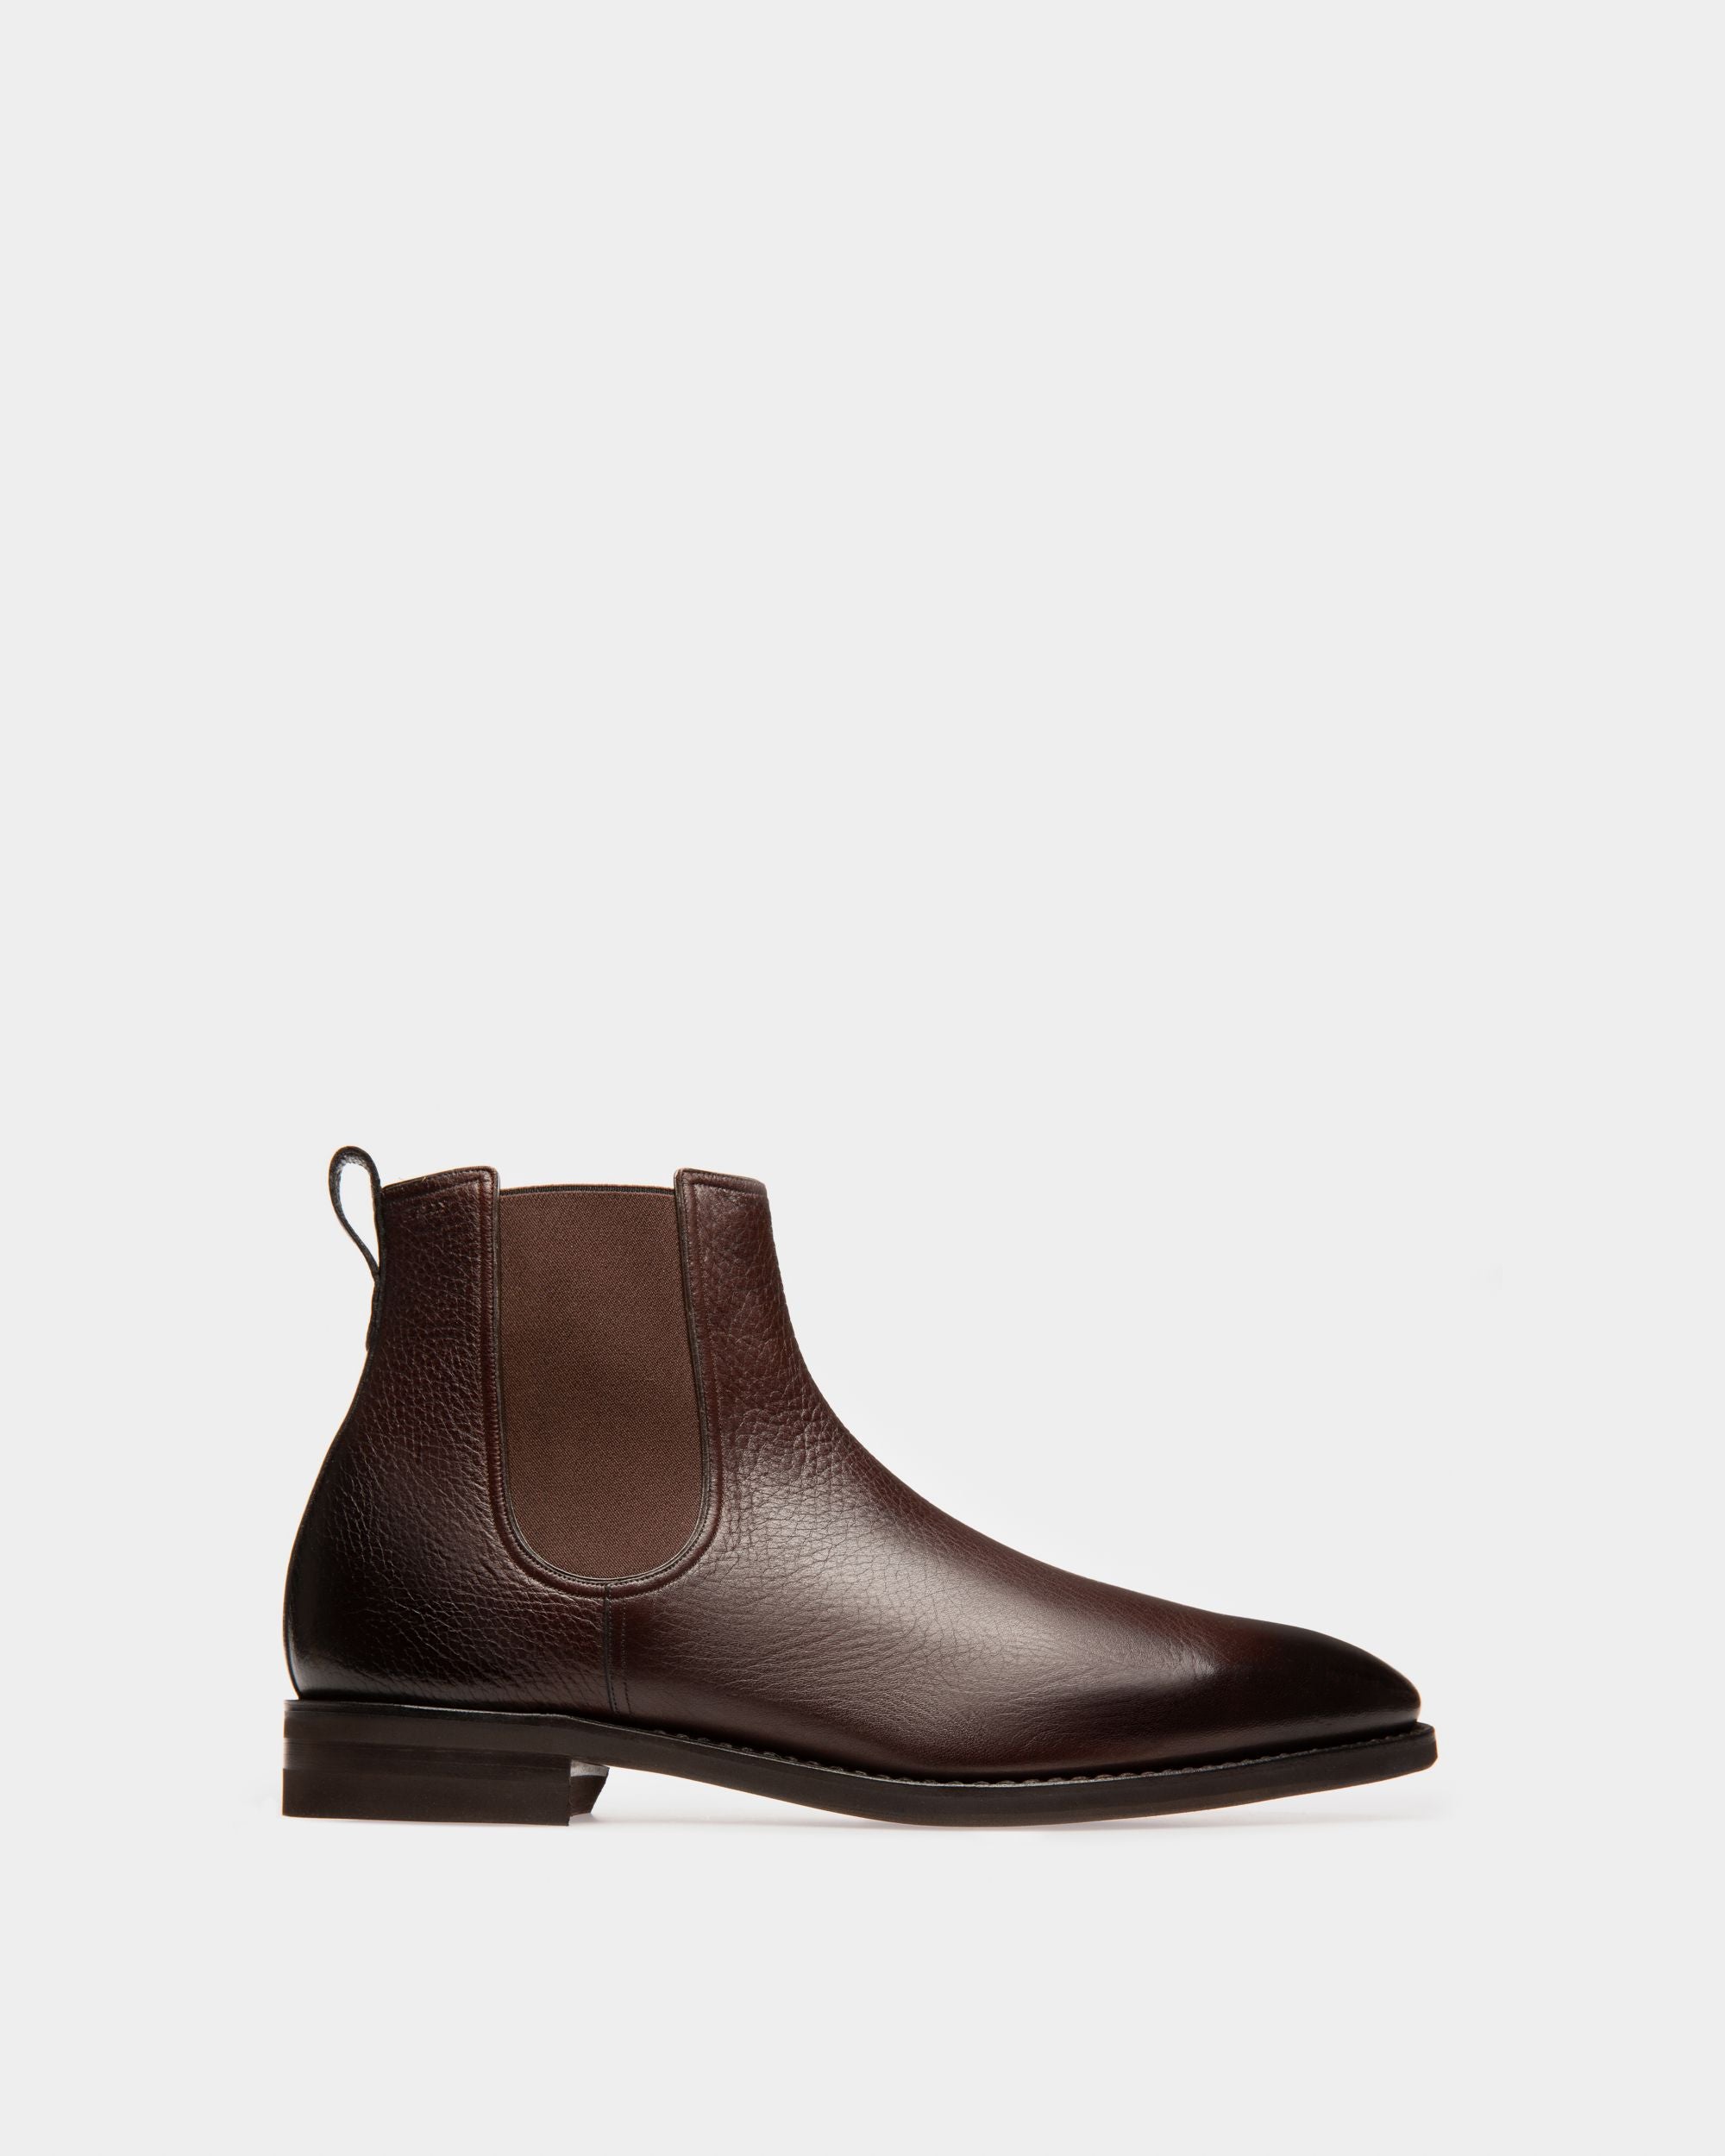 Scavone | Men's Boots | Coffee Leather | Bally | Still Life Side